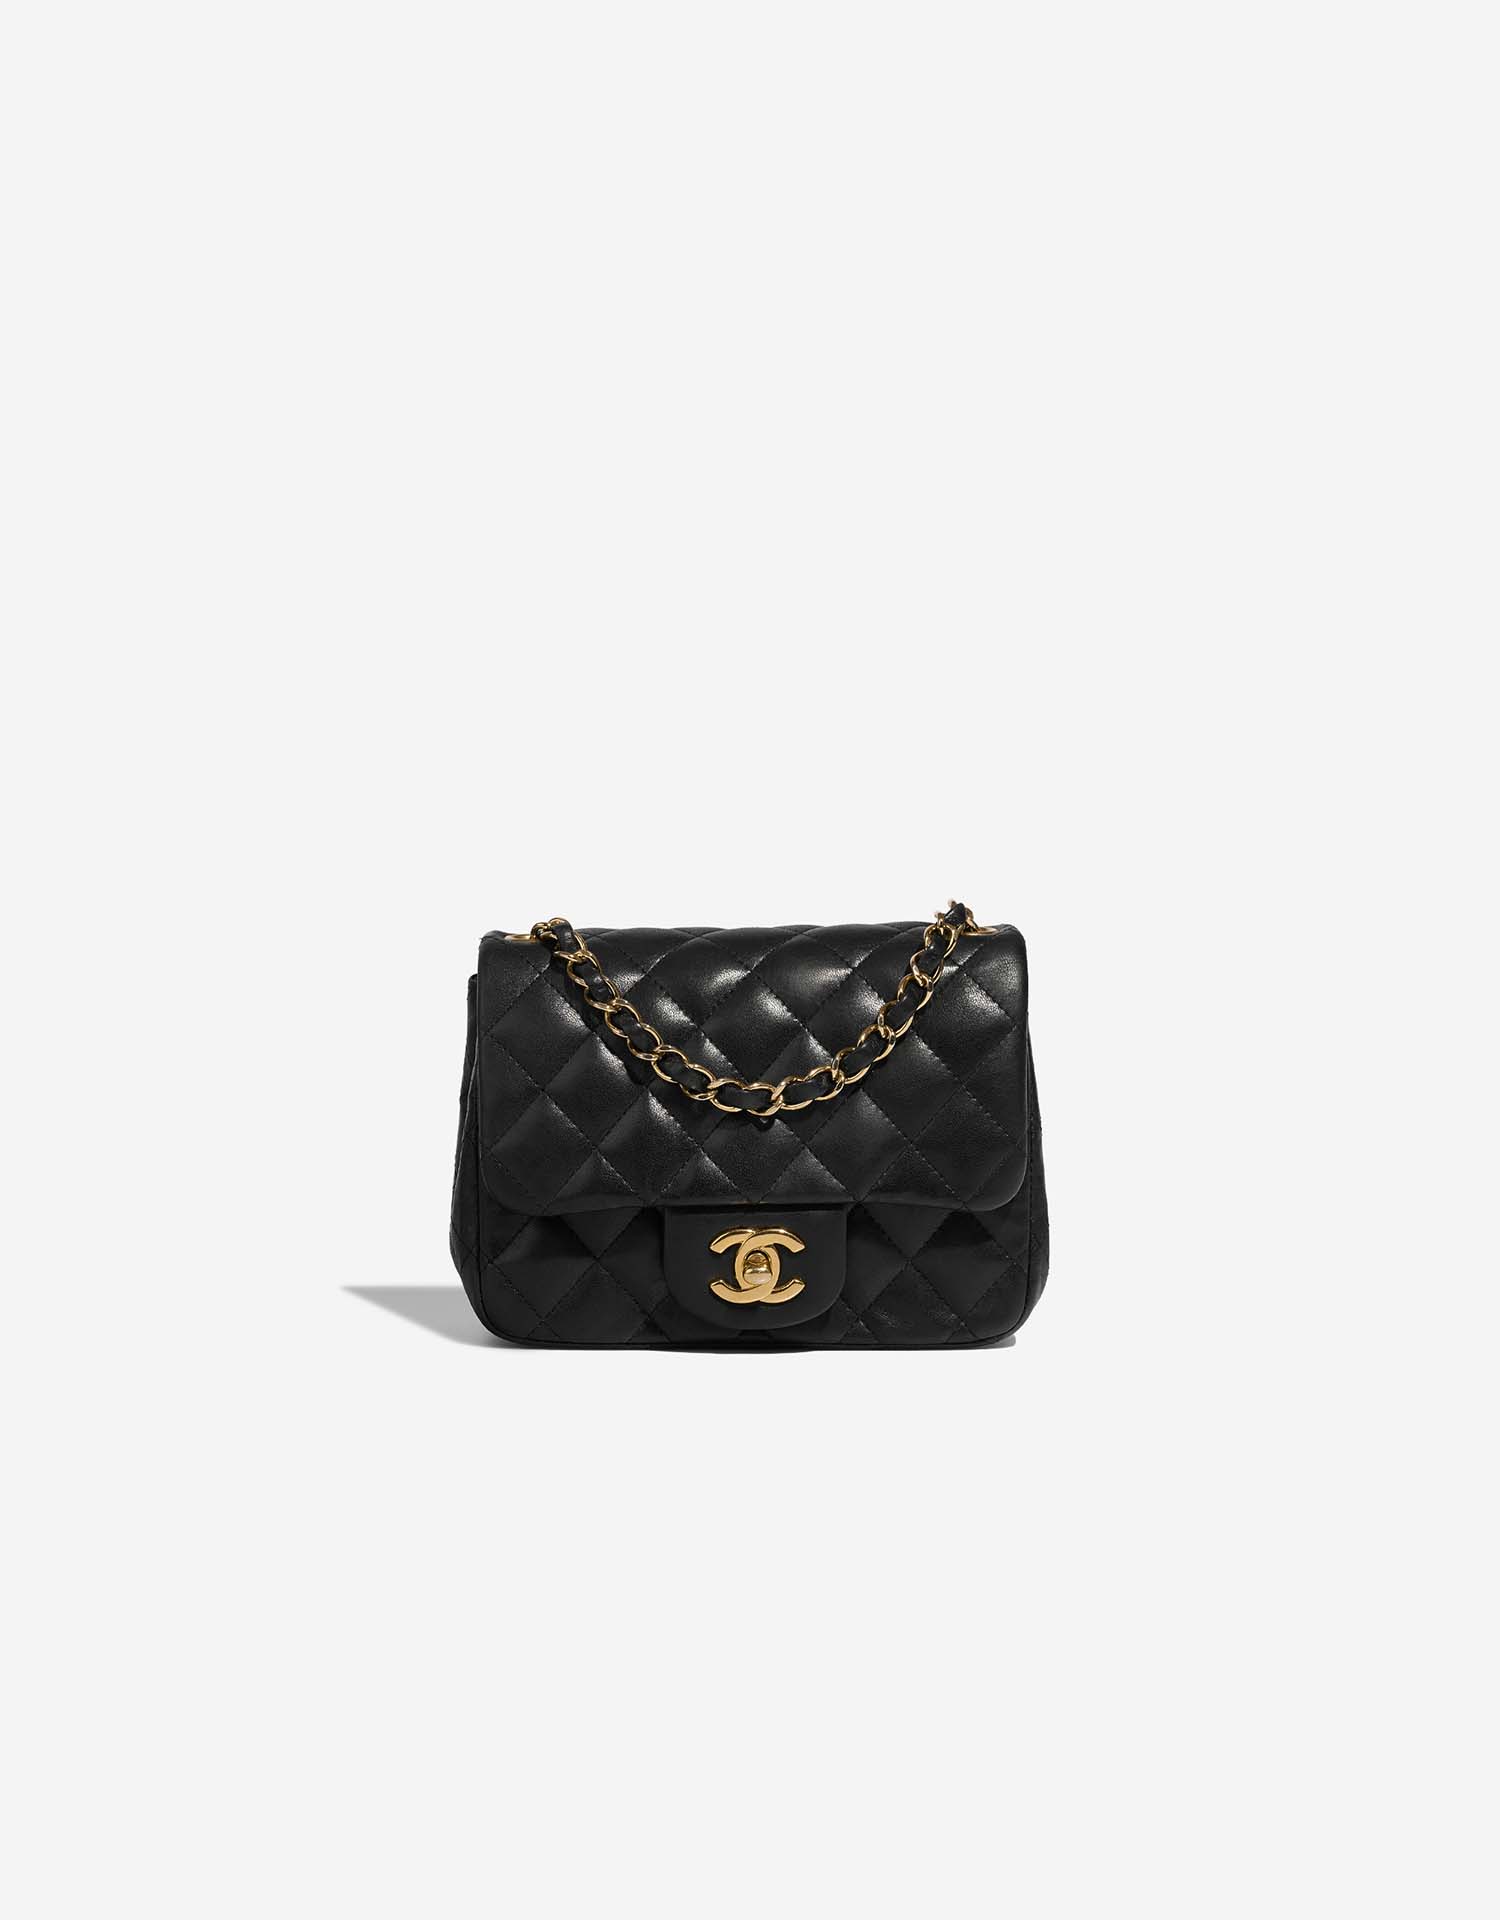 Chanel Quilted Ghw Cc Jumbo Chain Shoulder Bag Caviar Skin Leather A58600  Black Auction